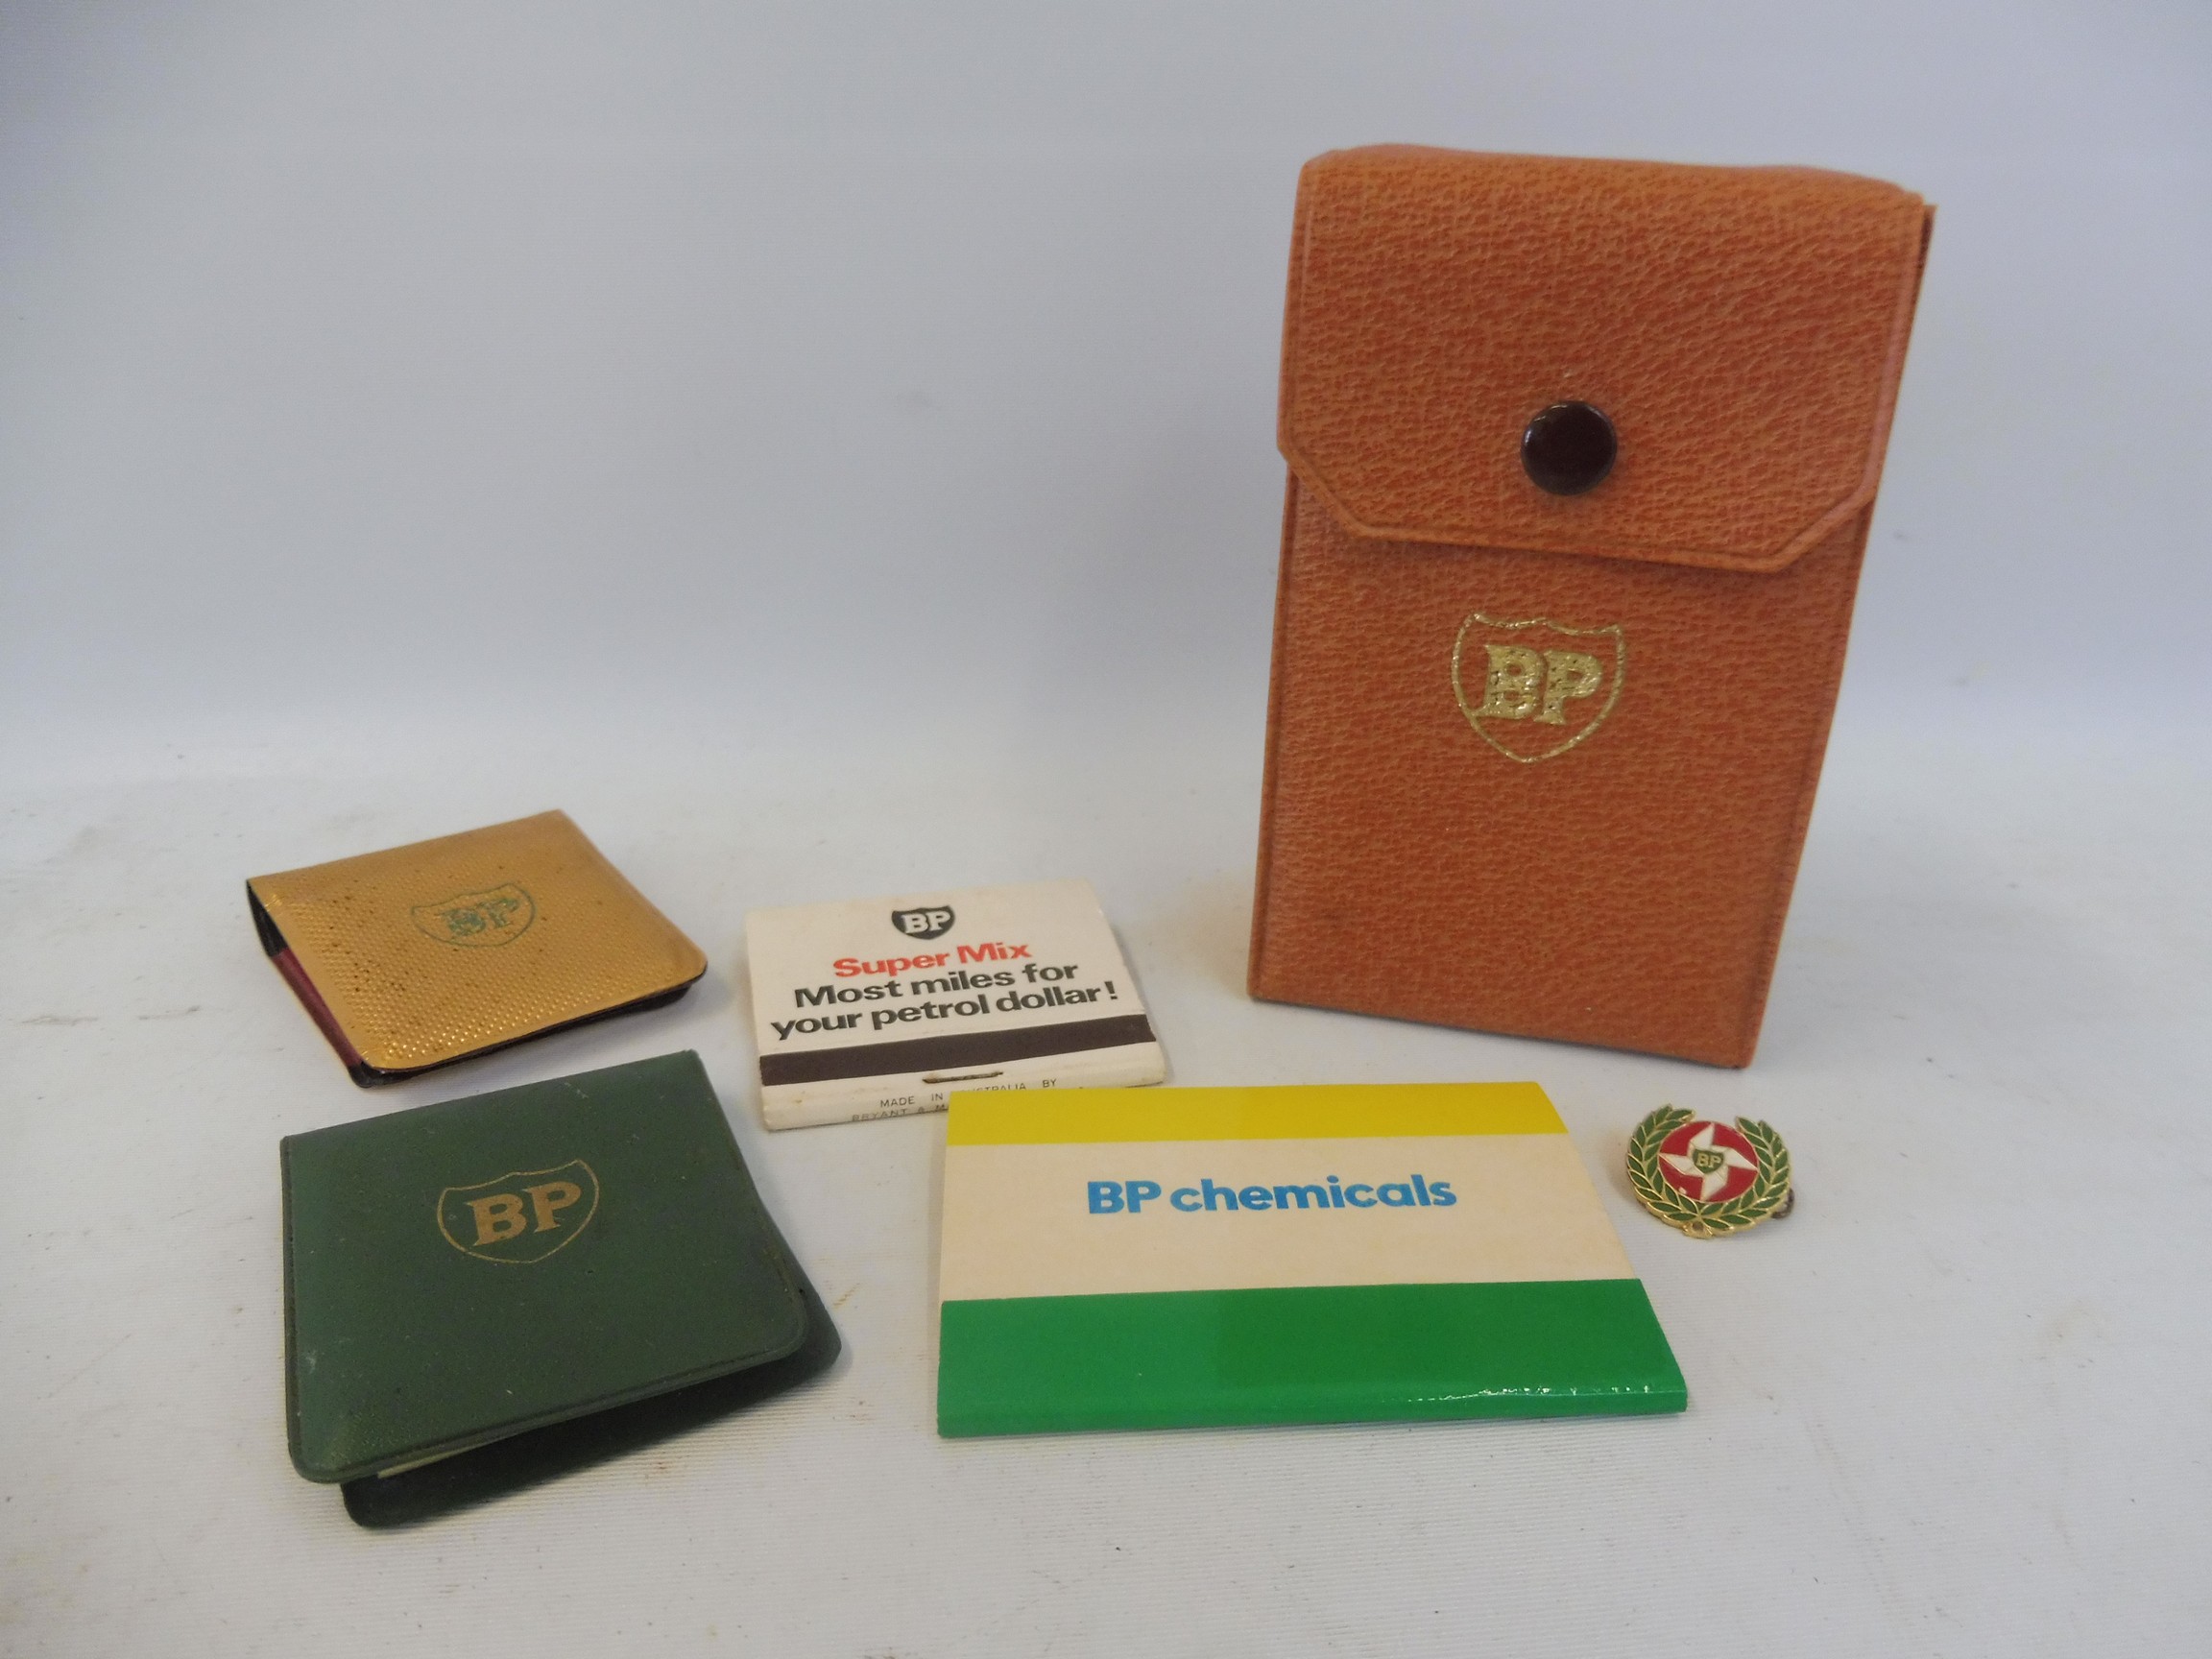 A BP Motorist vanity fold-out case complete with its accessories along with BP match books.